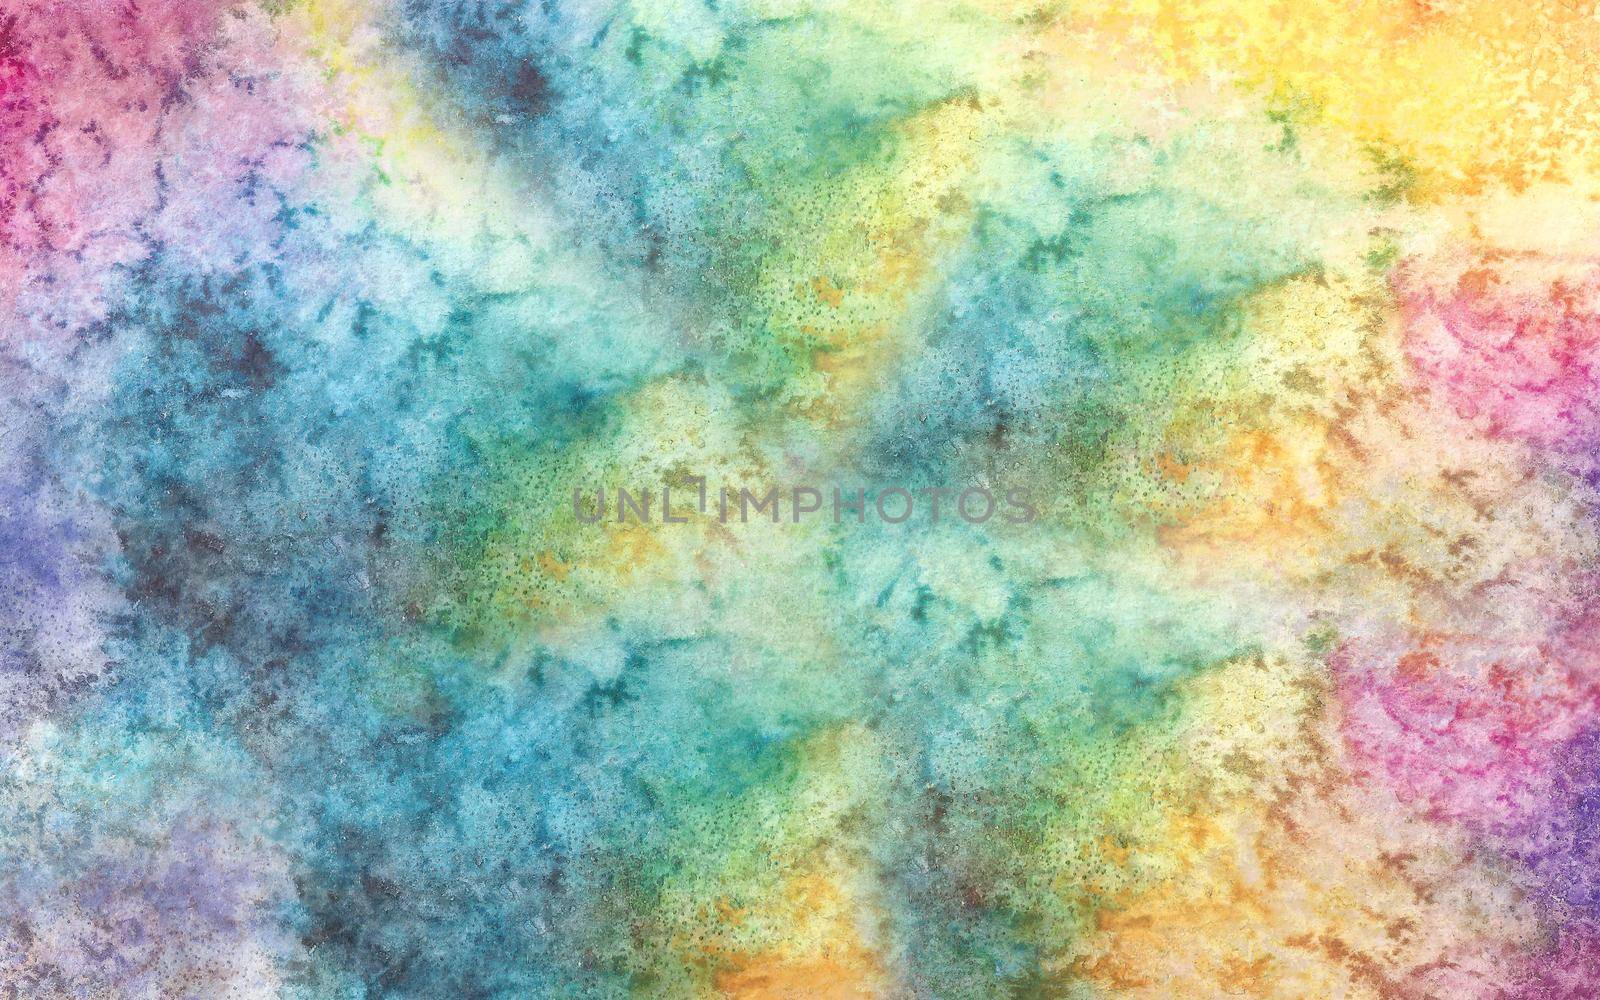 Abstract background image with paper texture with watercolor paints